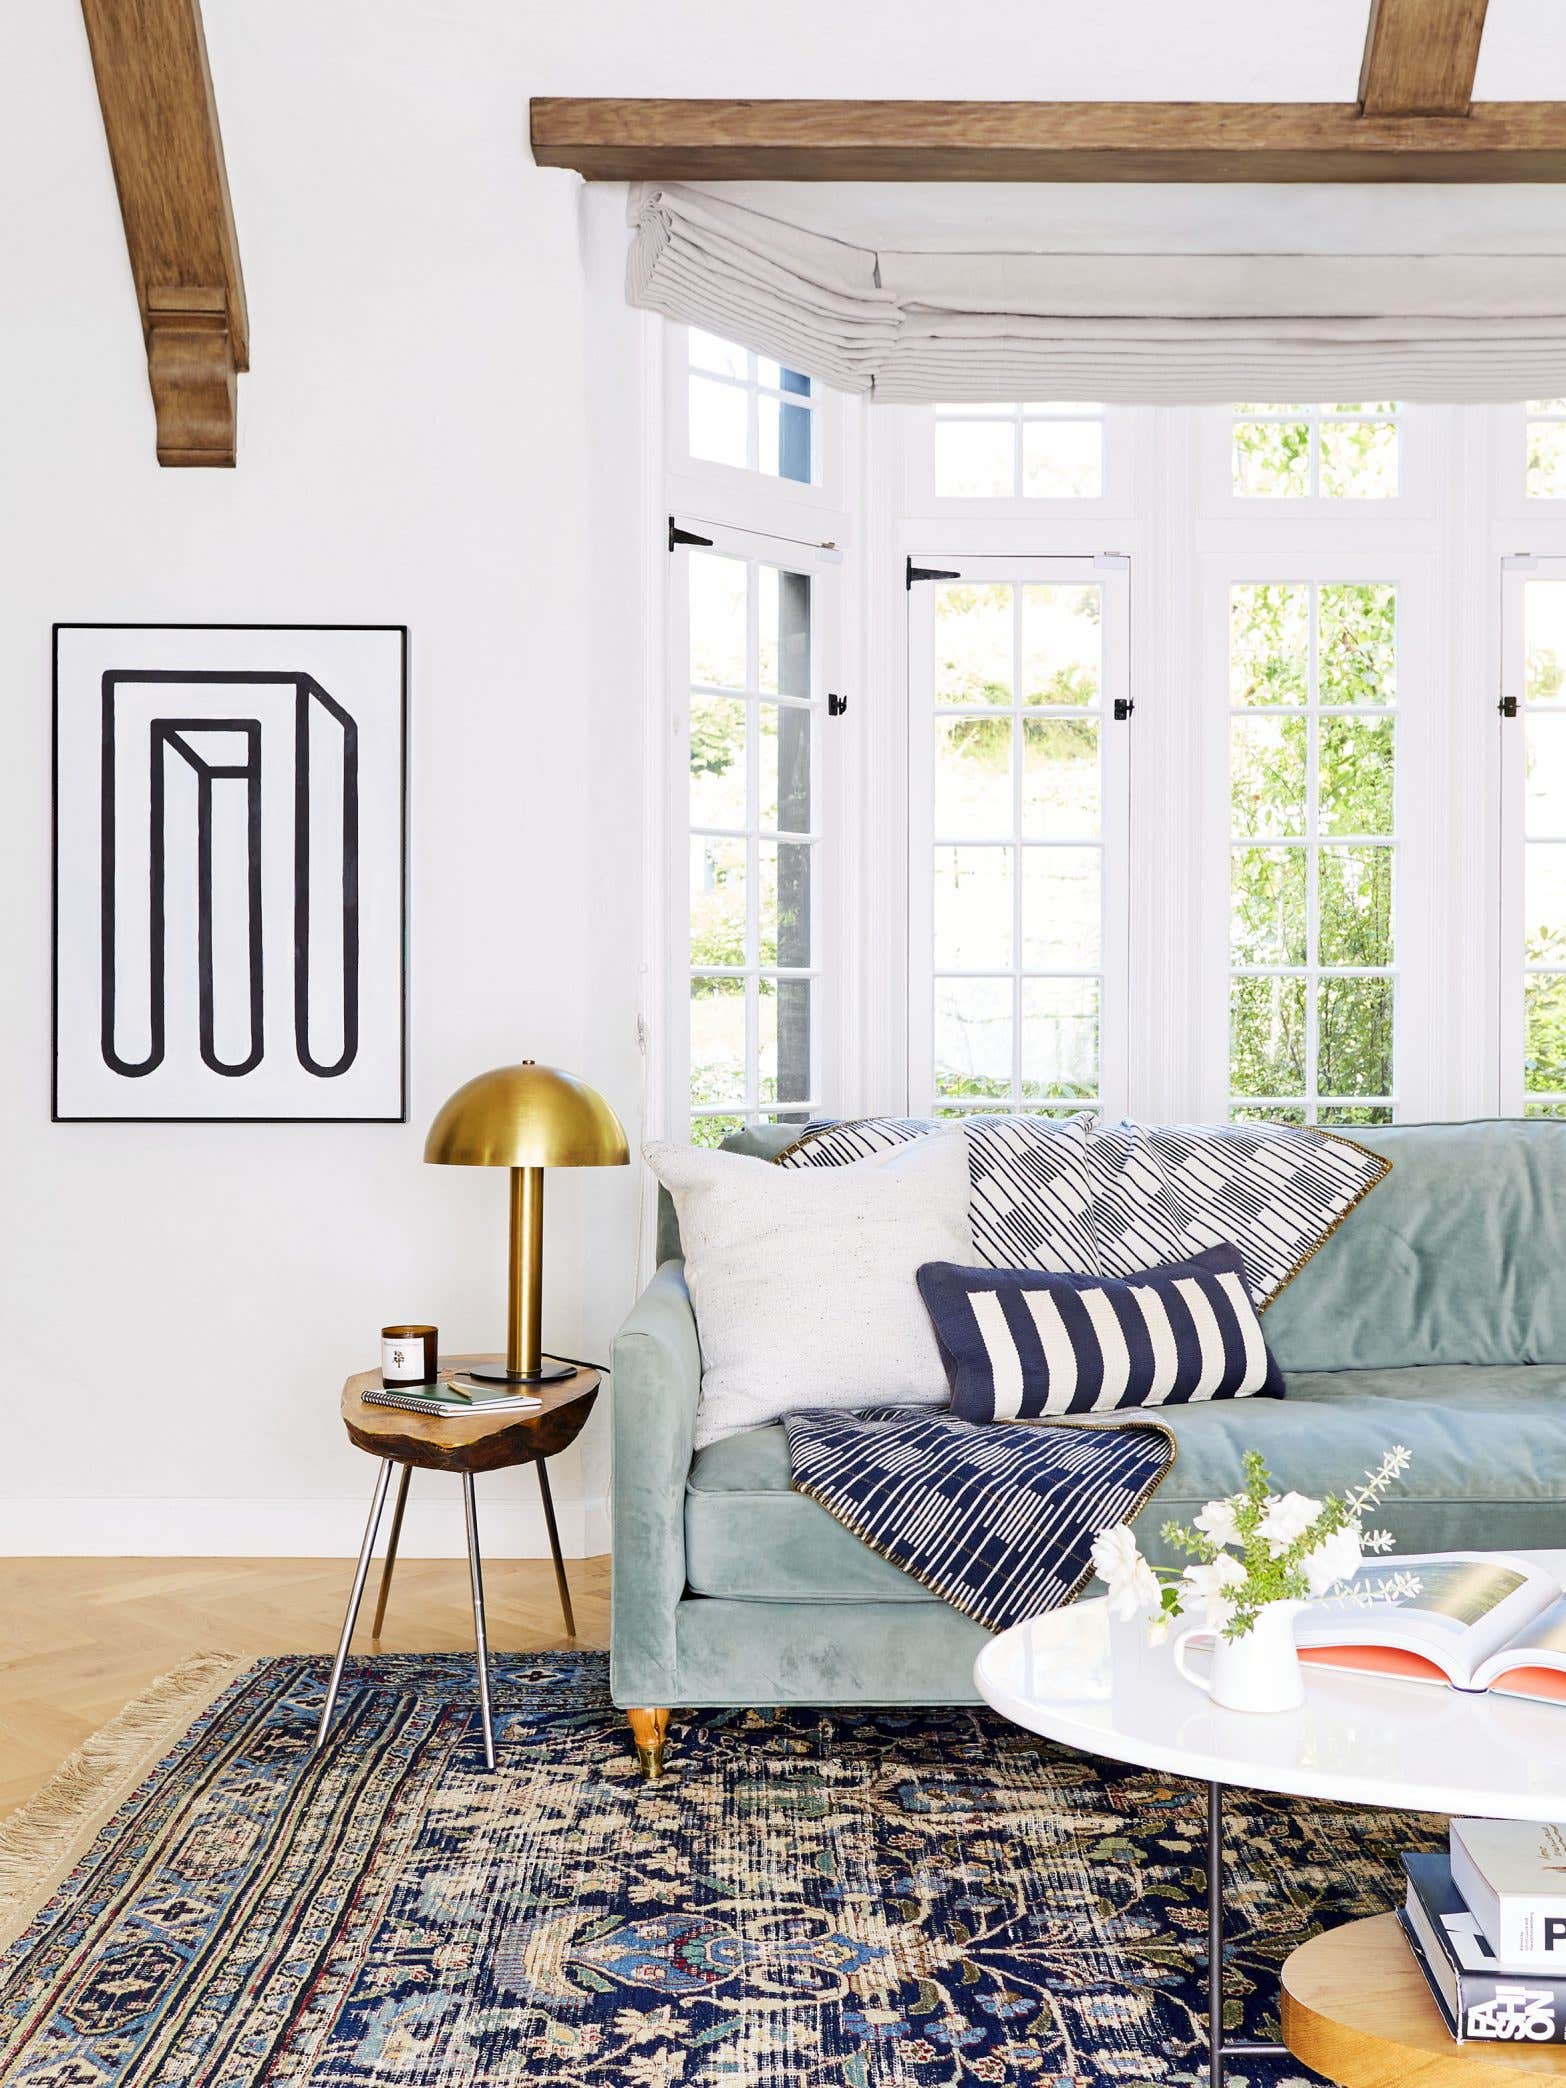 Don’t Toss It: Here’s How to Make Your Worn-Out Rug Look Brand-New